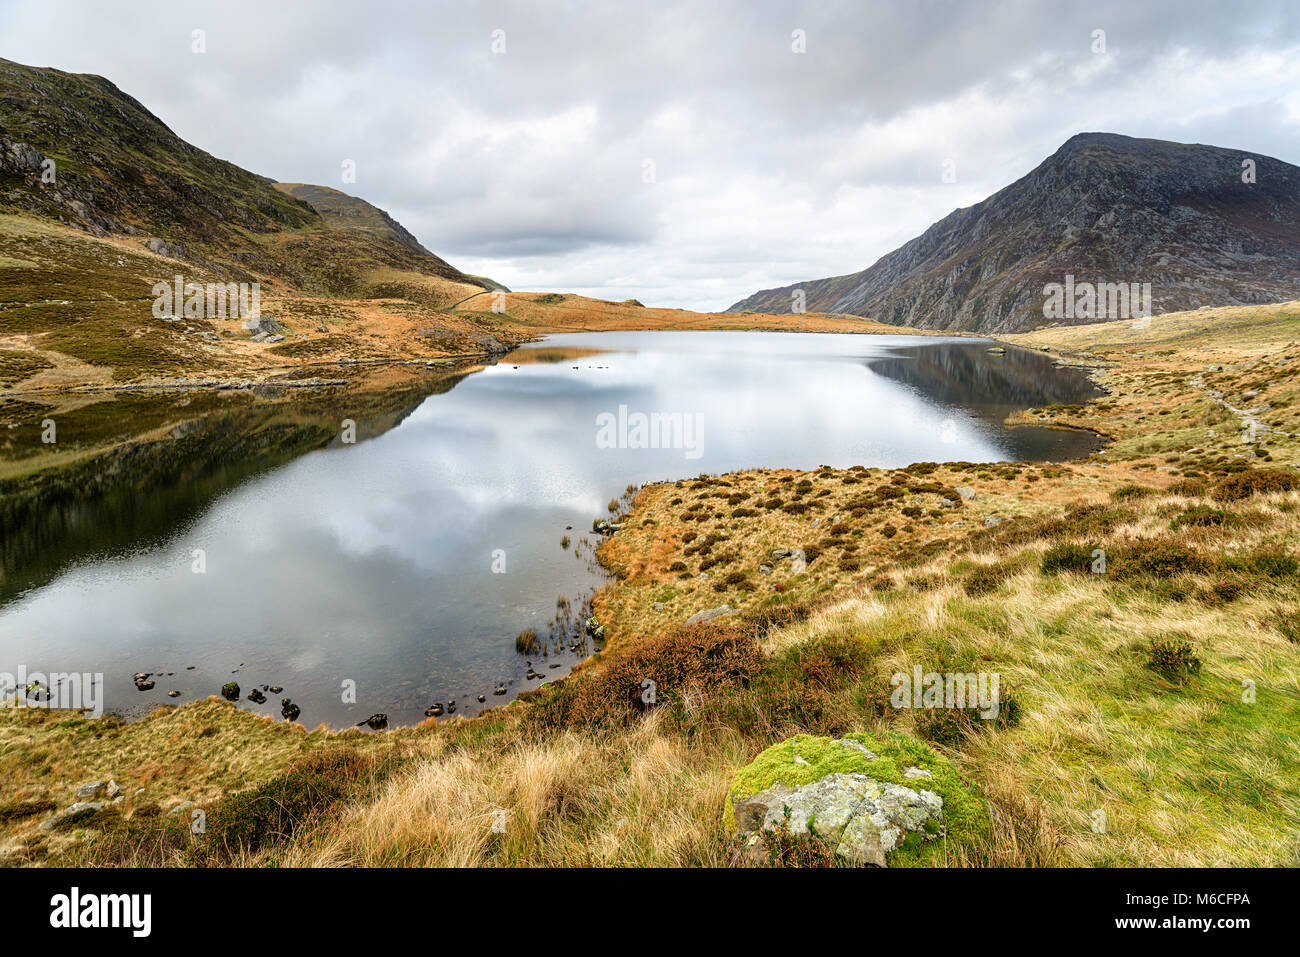 Llyn Idwal lake in the Glyderau Mountains of Snowdonia National Park in north Wales Stock Photo